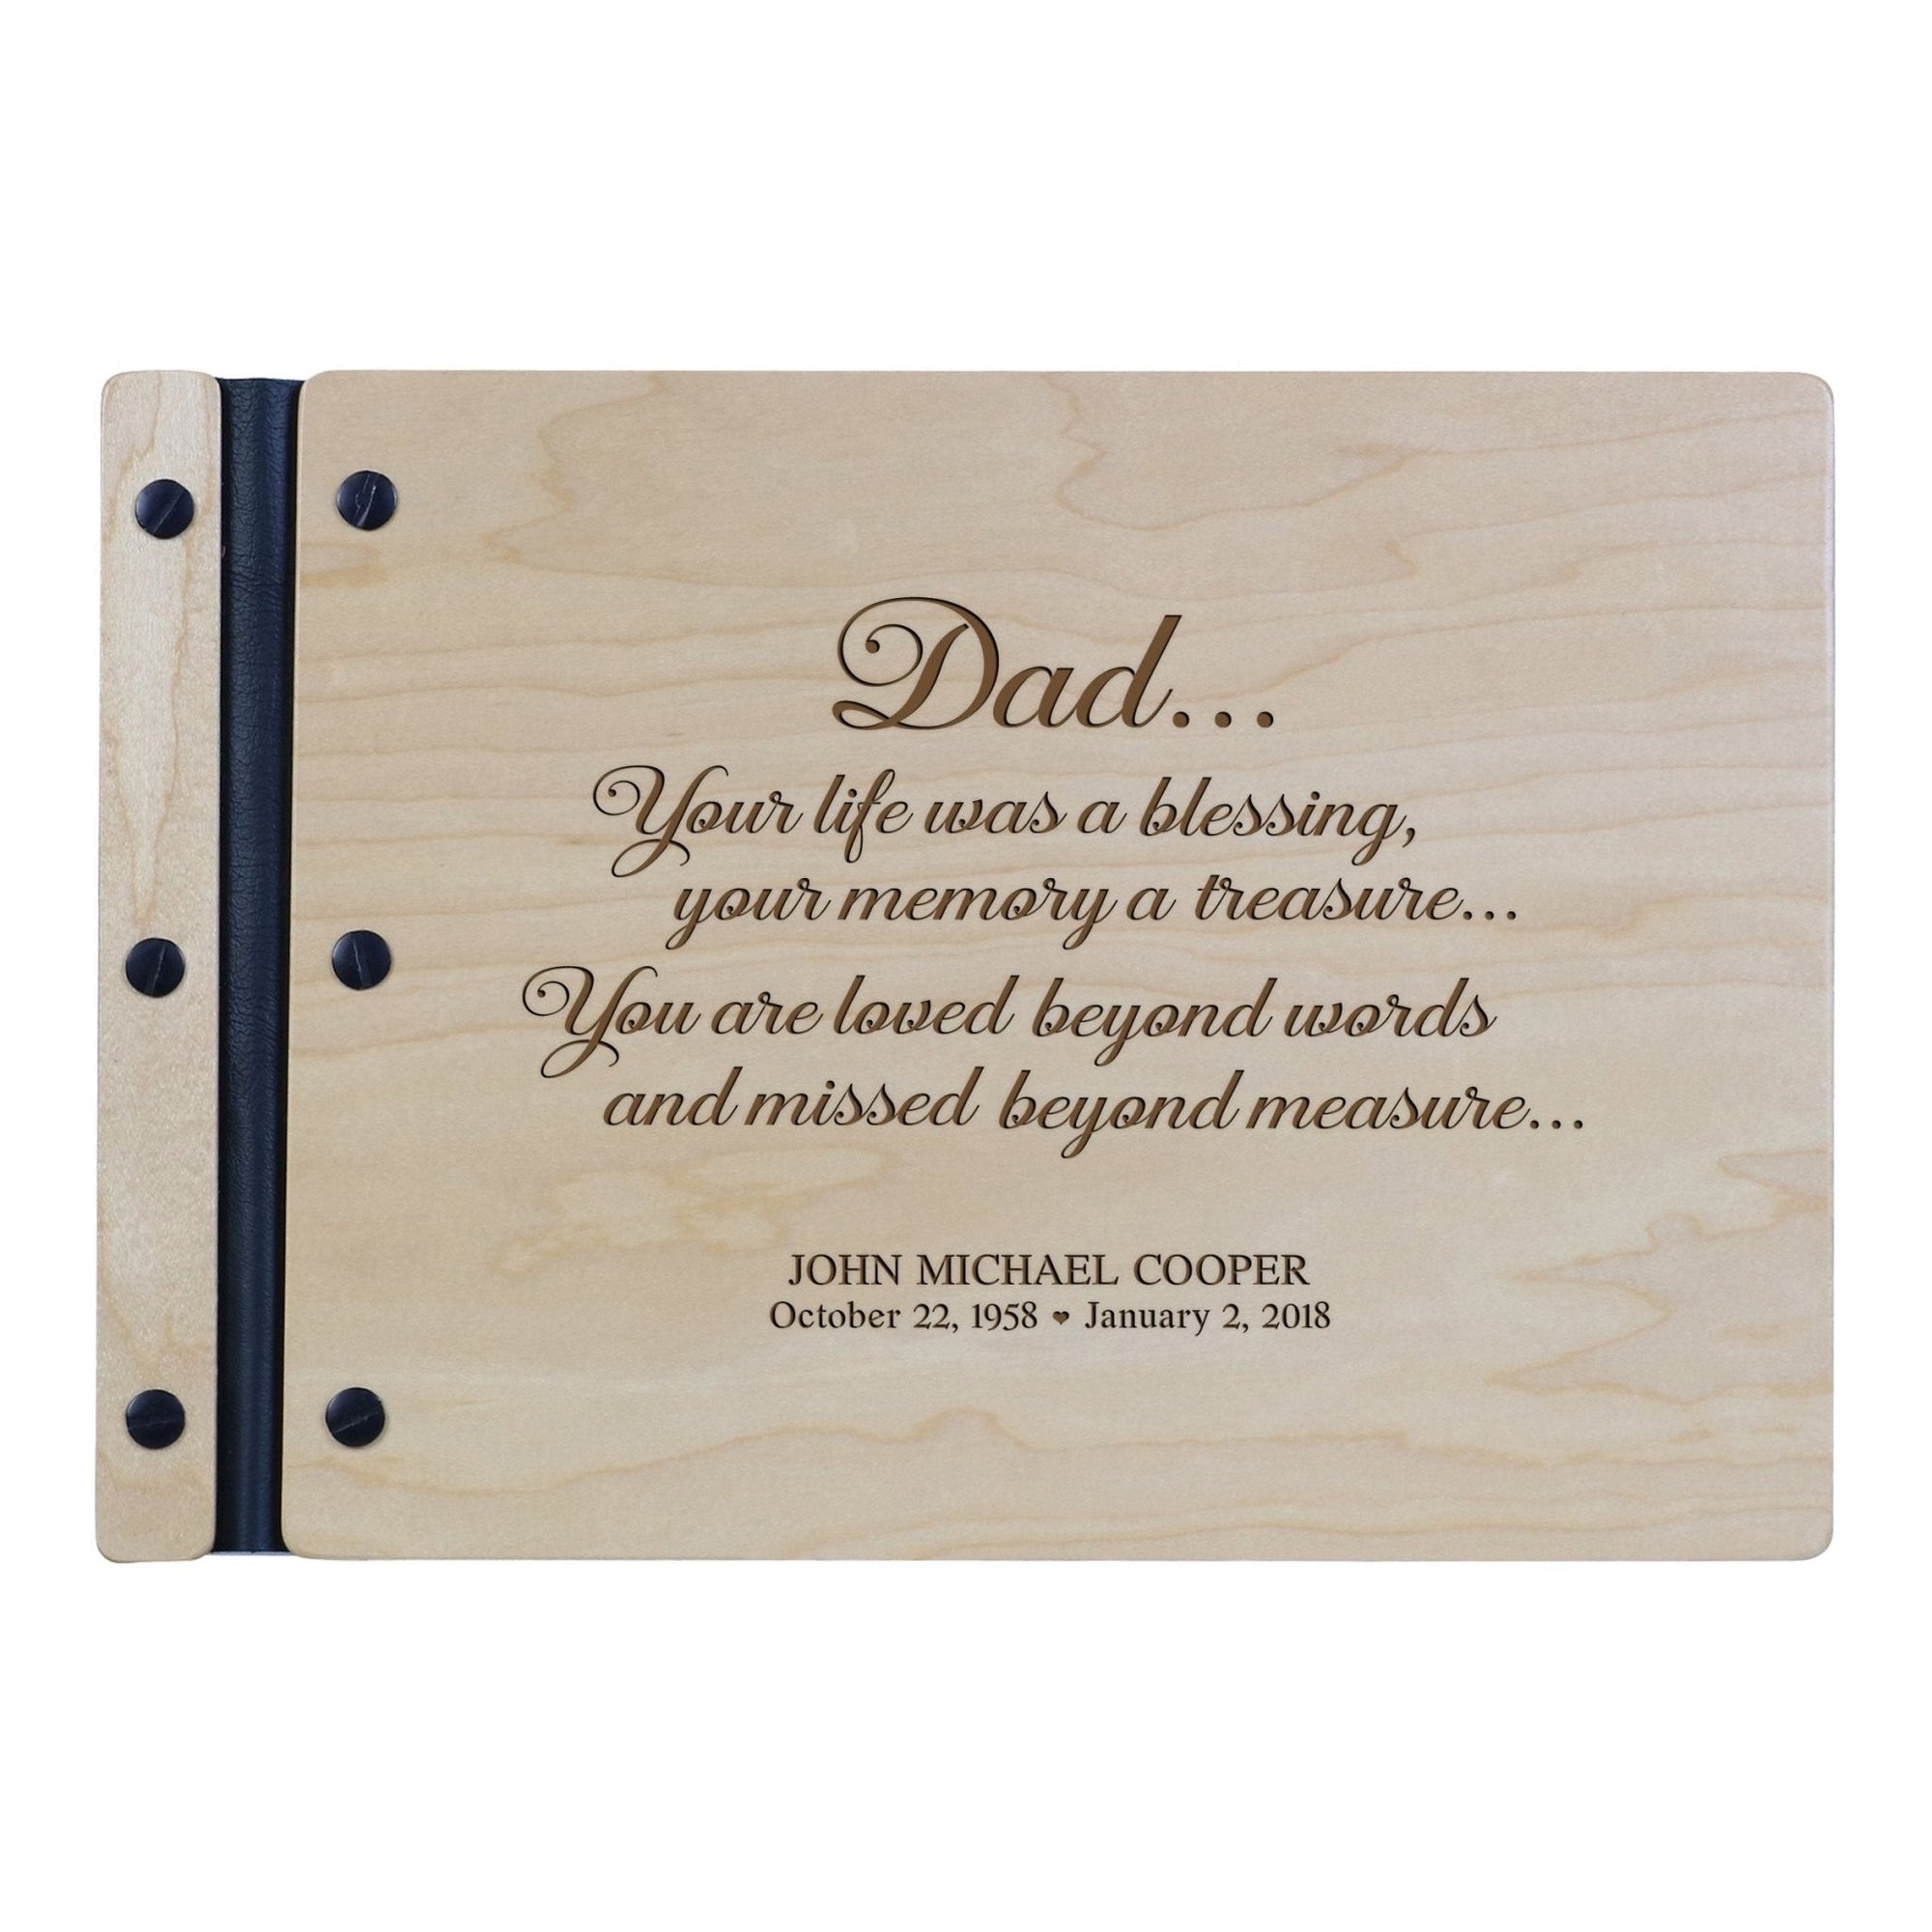 Personalized Memorial Guest Book - Dad Maple